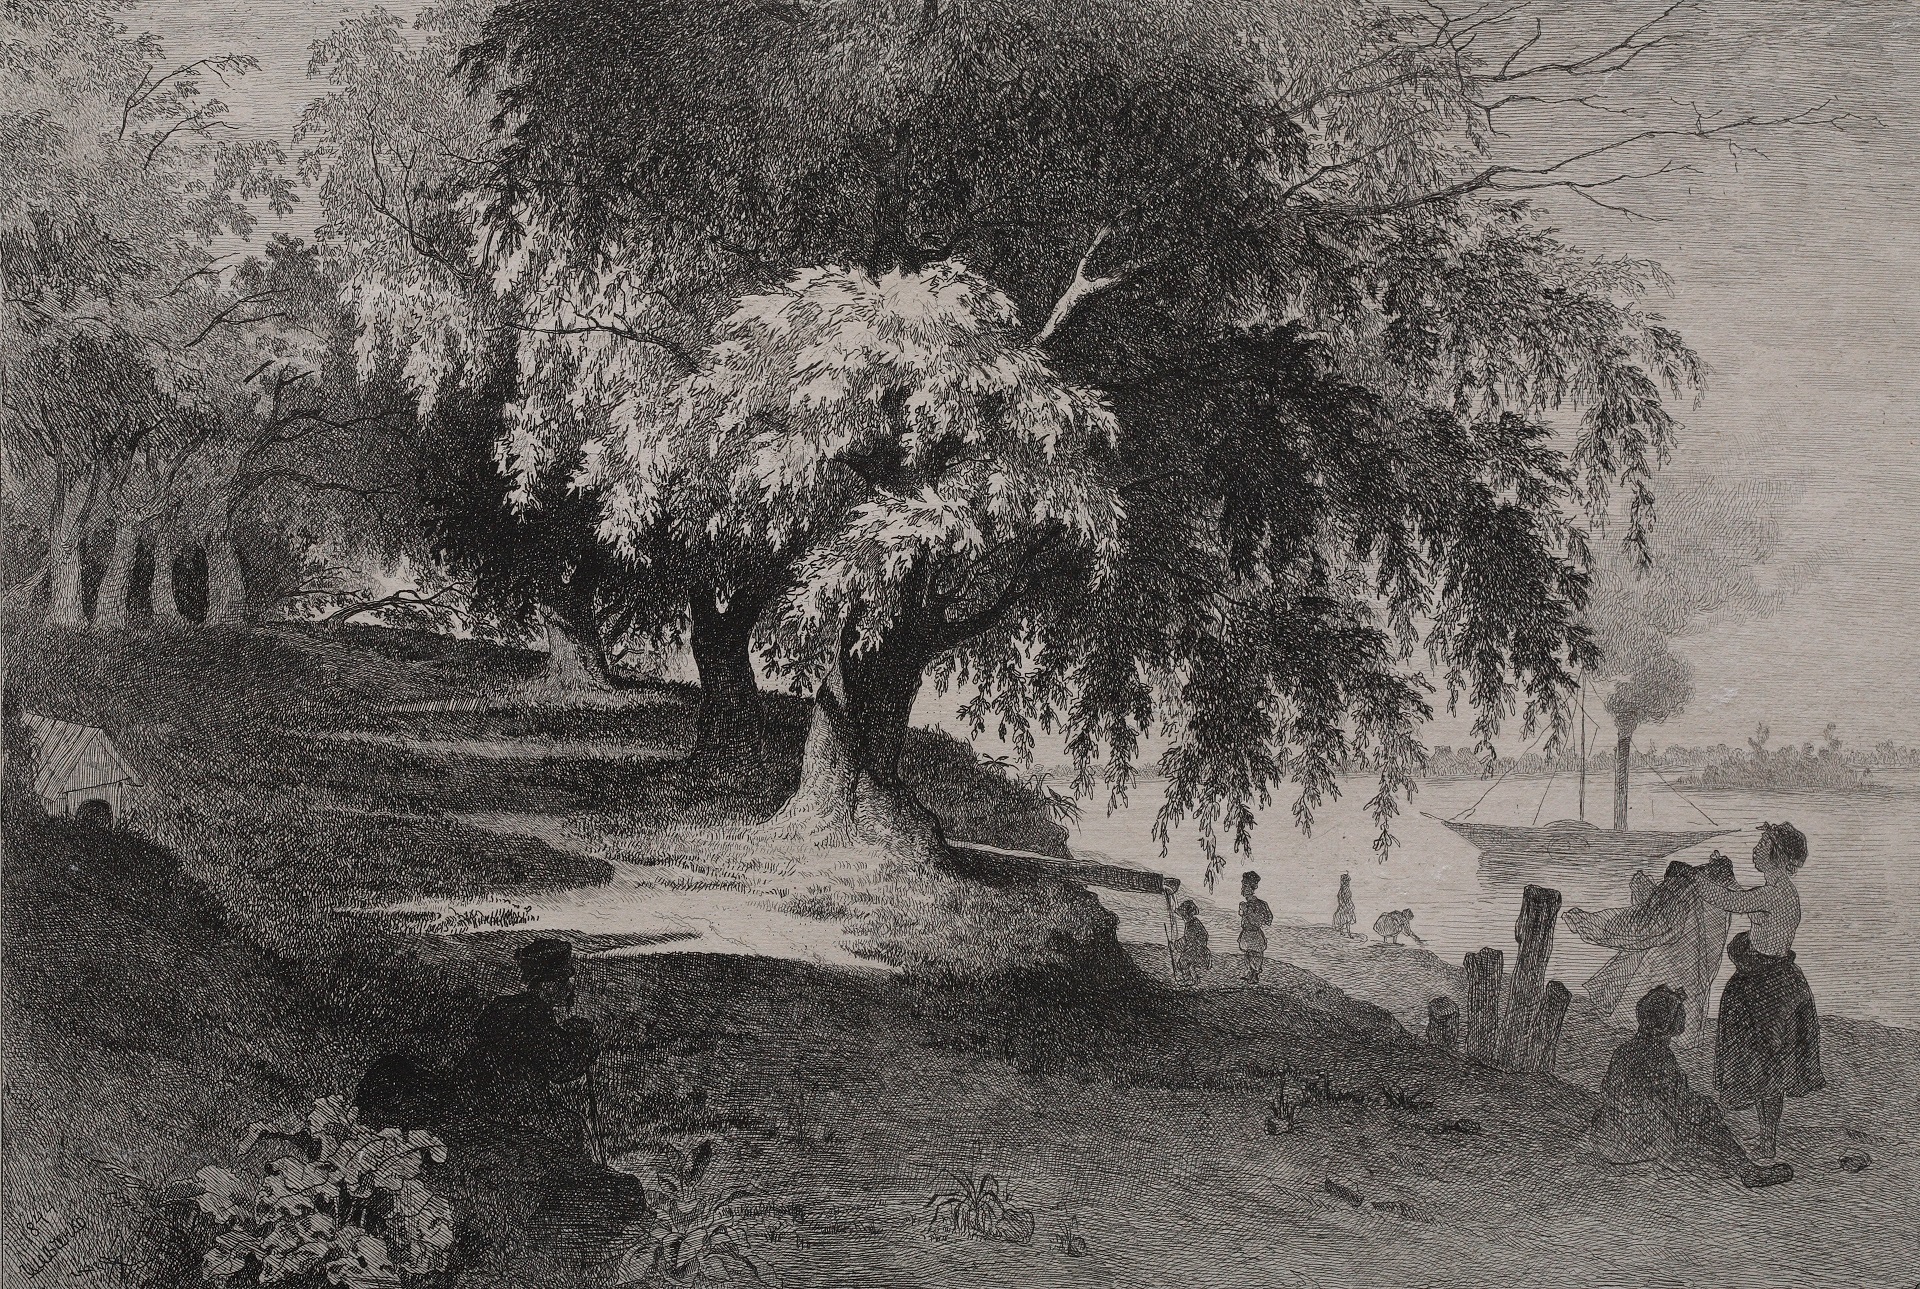 In Kyiv, 1844, etching